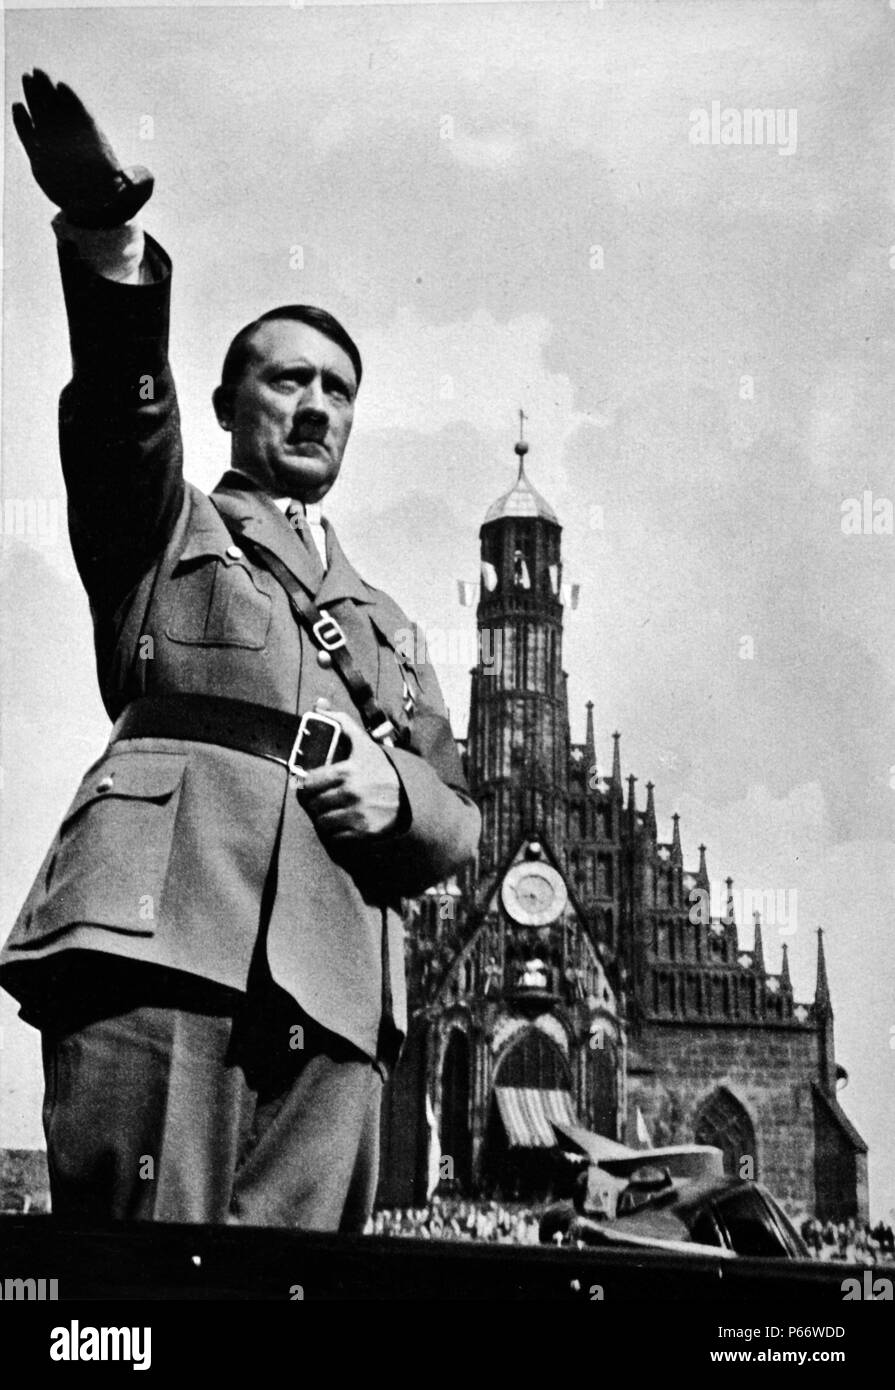 Adolf Hitler 1889-1945. German politician and the leader of the Nazi Party, at a Rally in the early years 1923 Stock Photo